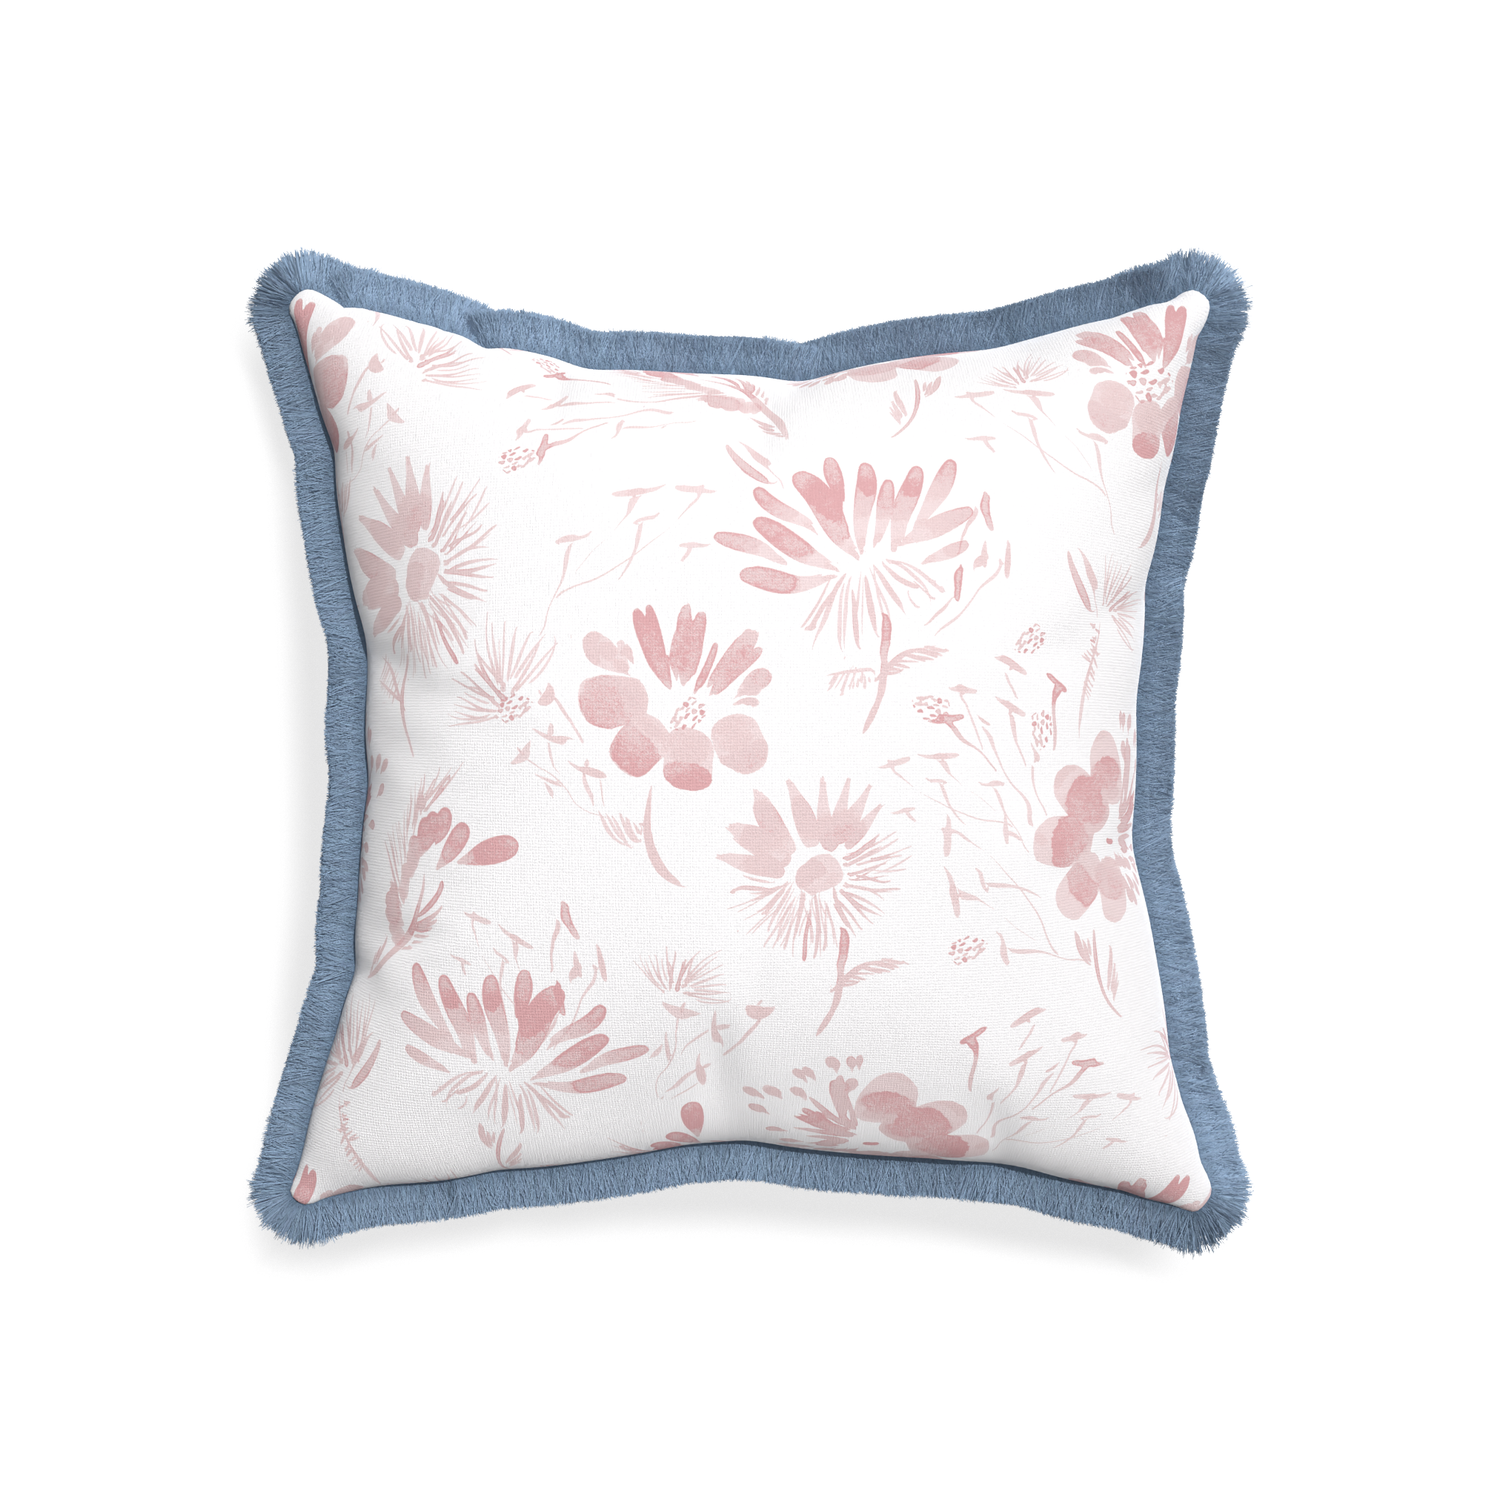 20-square blake custom pink floralpillow with sky fringe on white background